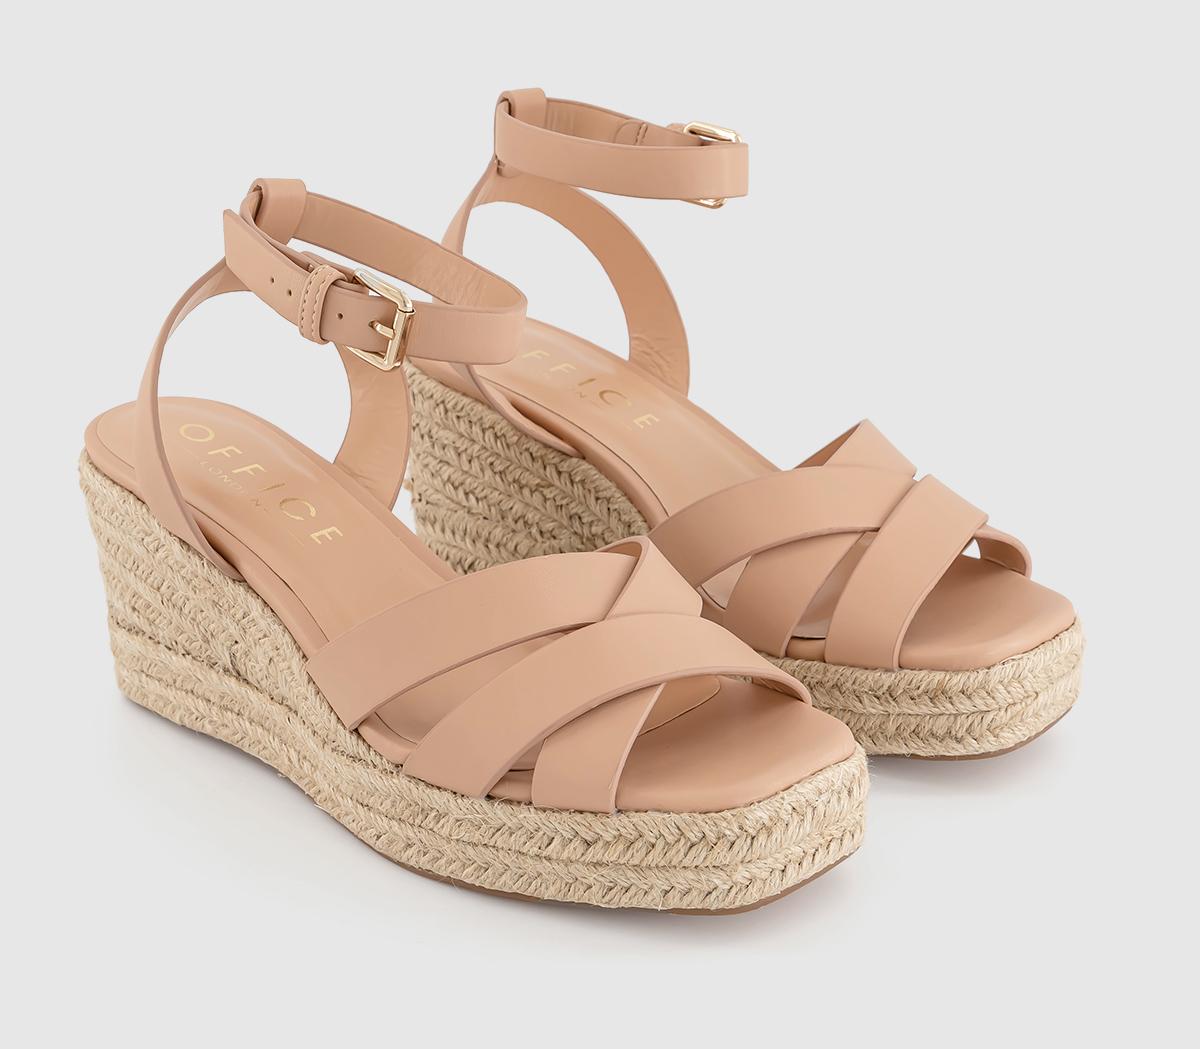 OFFICE Womens Martina Multi Strap Mid Espadrille Wedges Blush Pink, 7